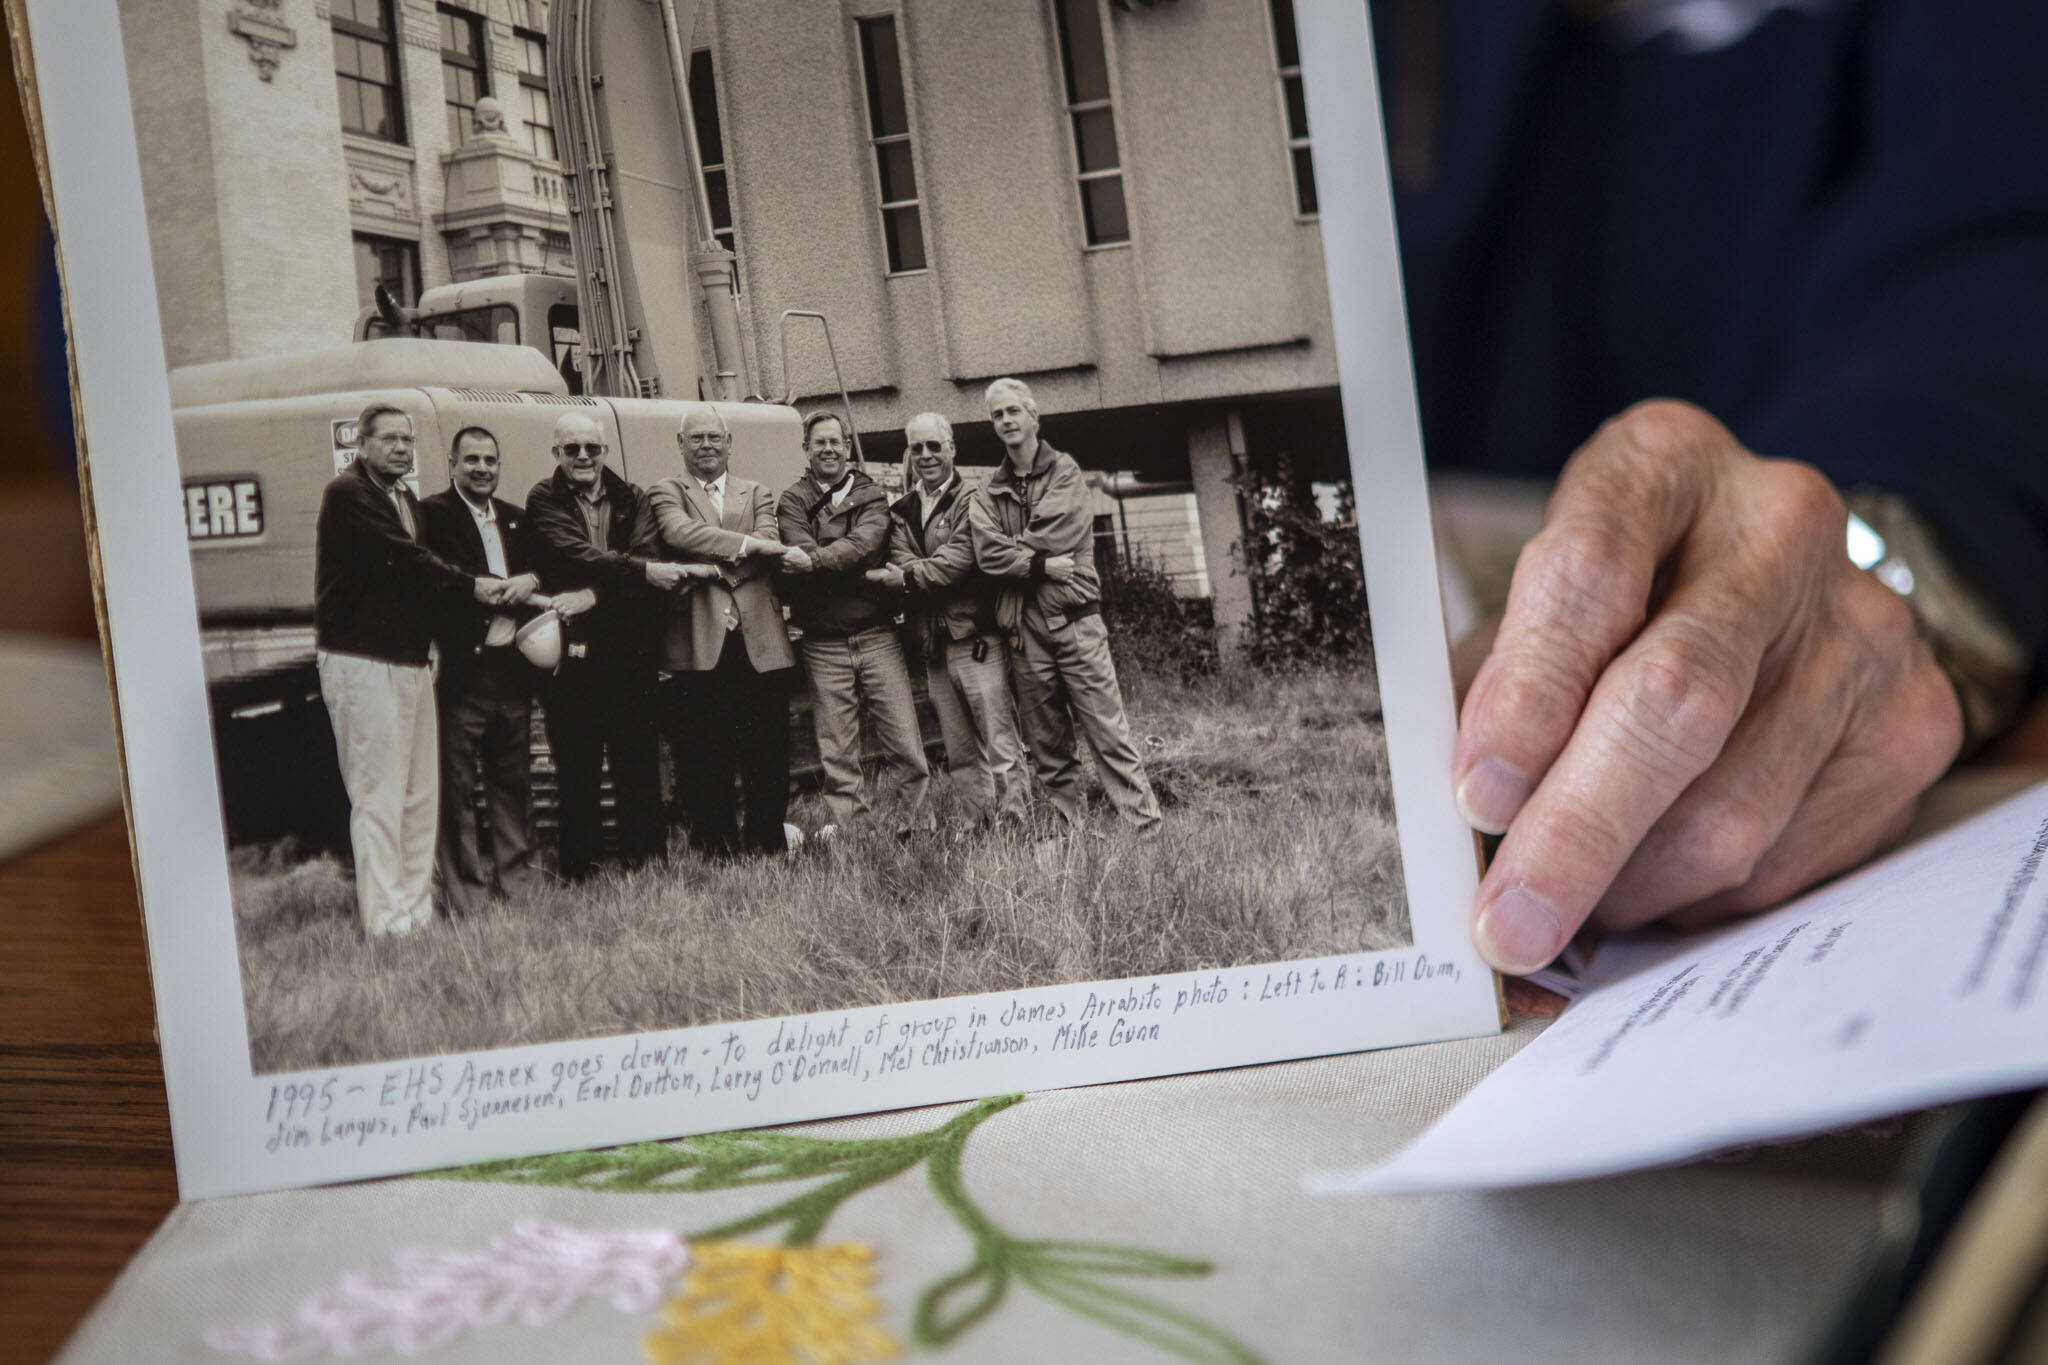 Lawrence E. O’Donnell holds a photograph of himself when he was a consultant and a part of a project removing “the annex” from Everett High School in 1995 at his brother Jack’s home in Everett, Washington on Wednesday, May 29, 2024. O’Donnell is third from the right. (Annie Barker / The Herald)